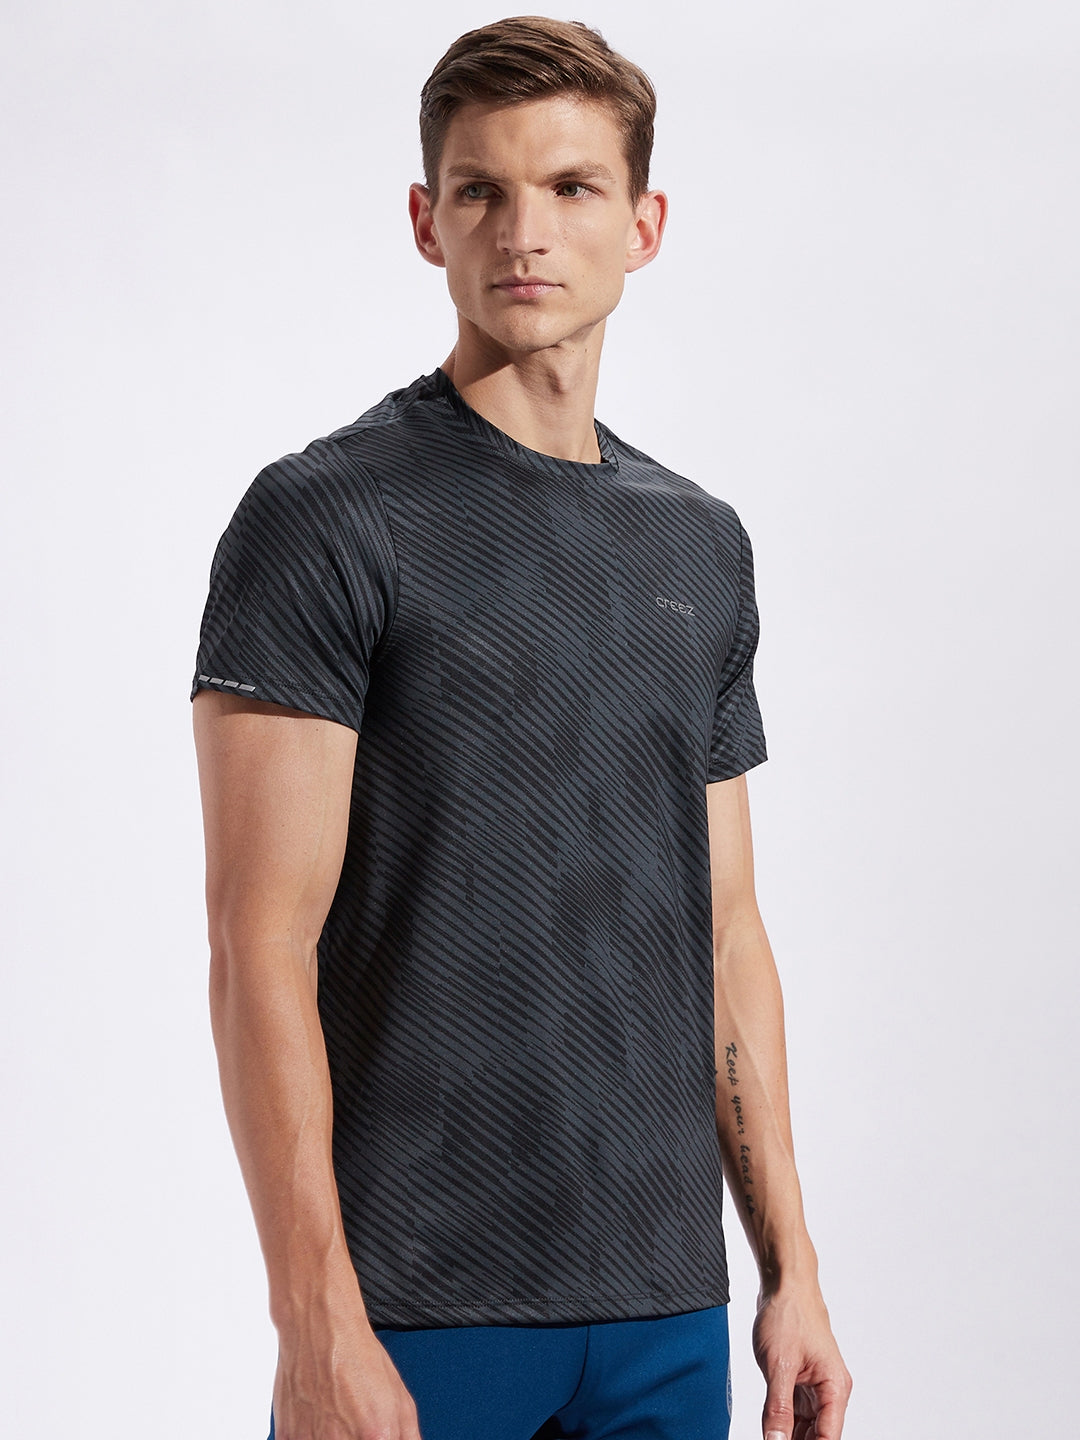 Charged Printed Stretchable T-shirt